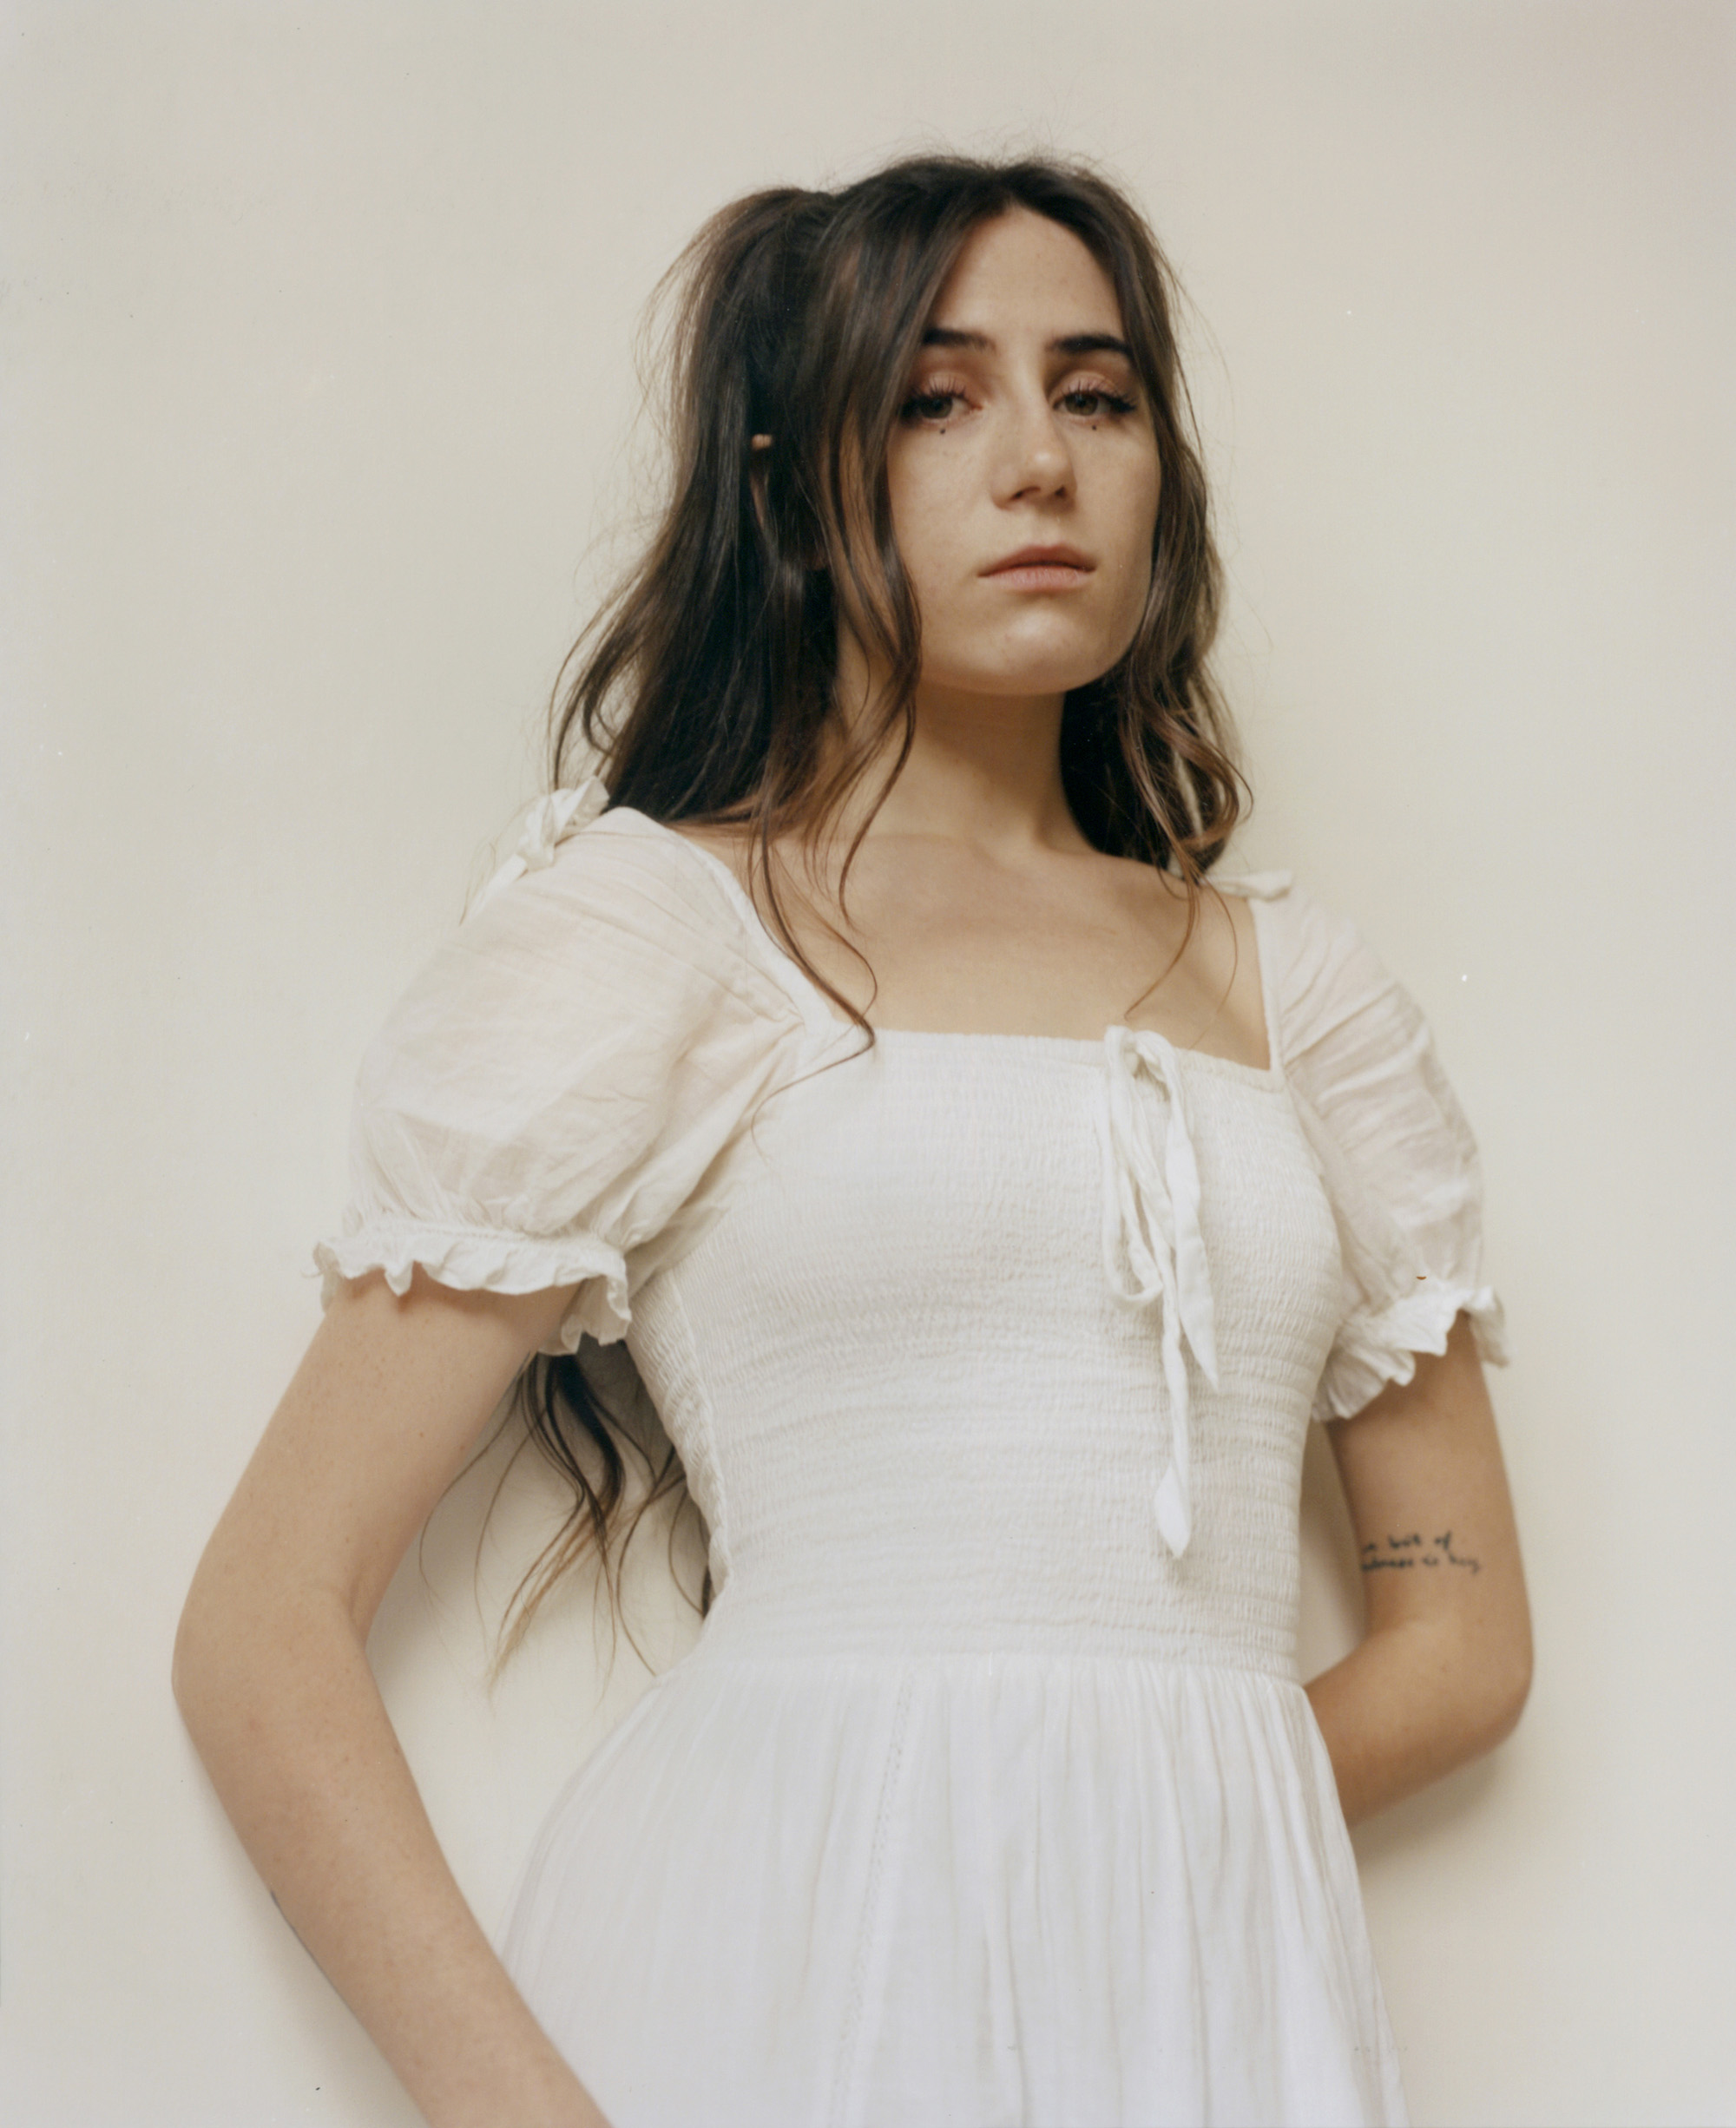 a portrait of dodie in a white dress standing against an off white background